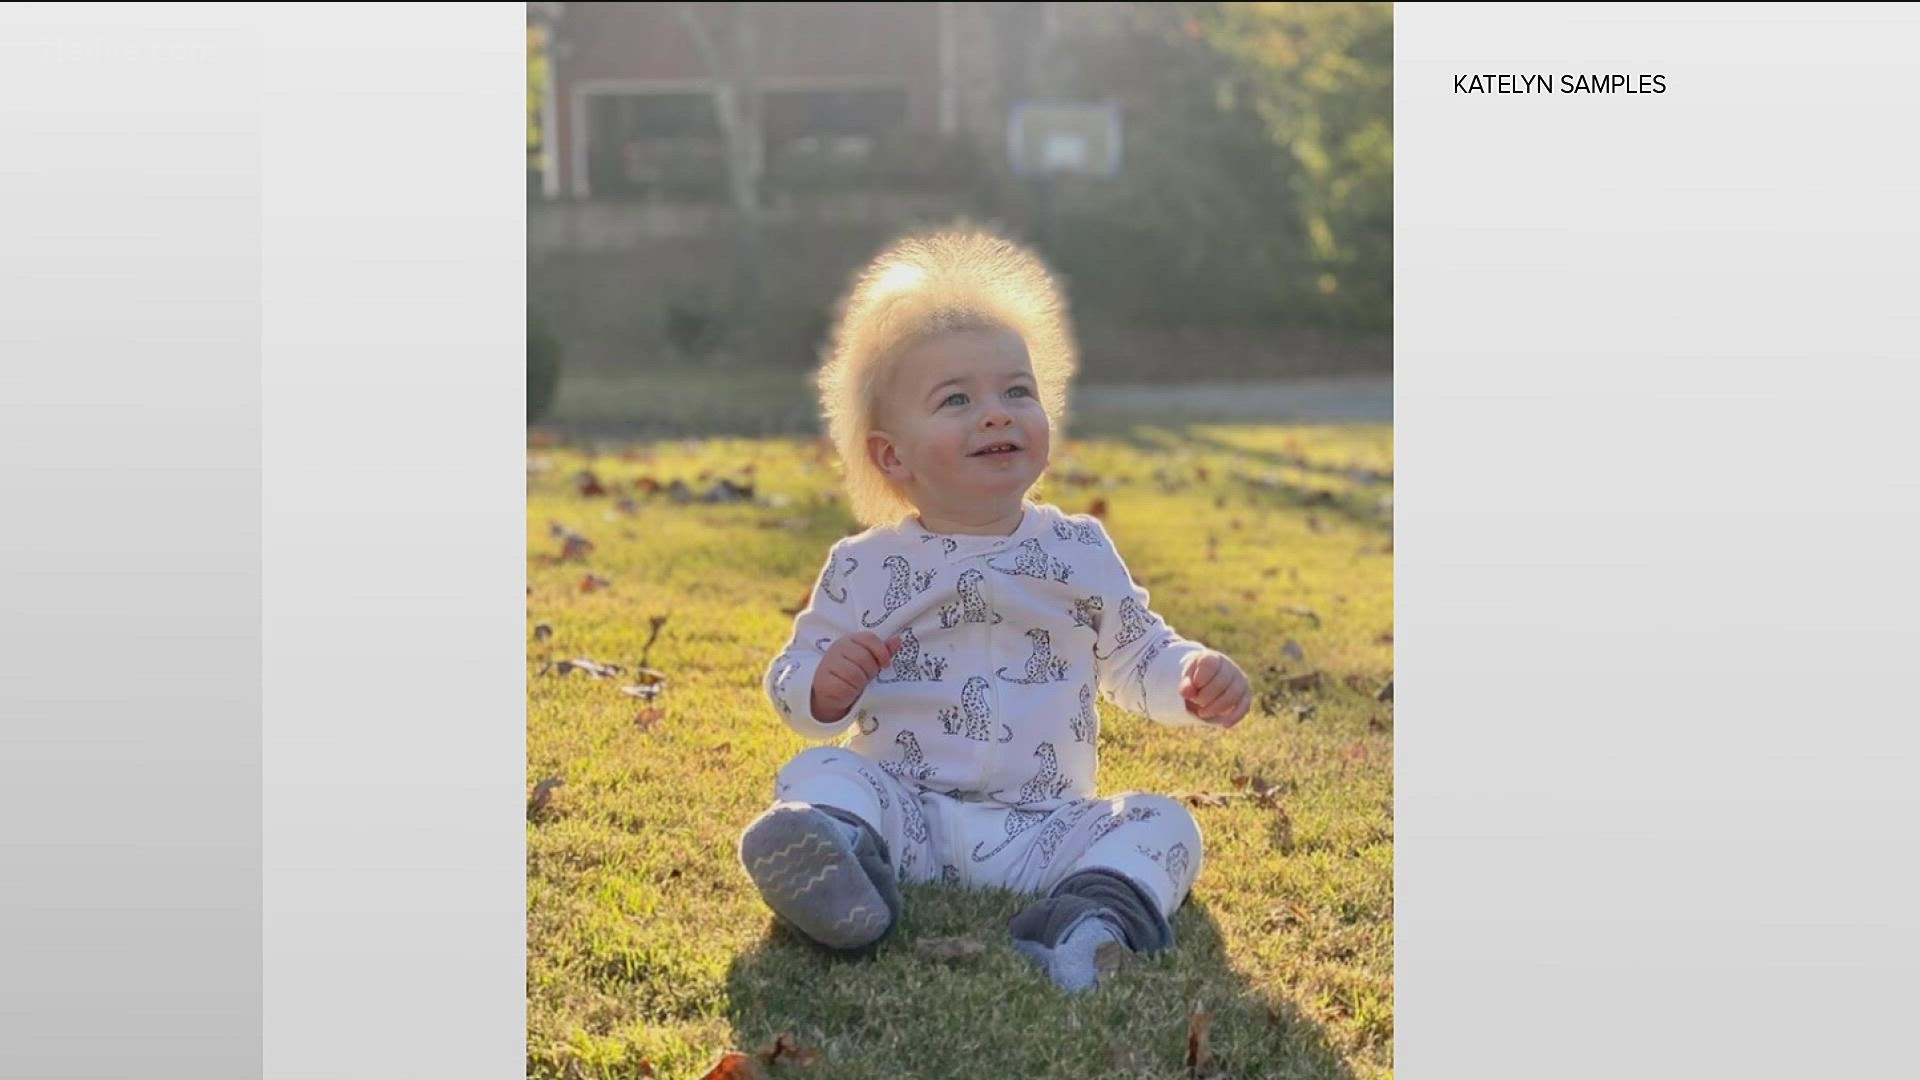 The child is said to have uncombable hair syndrome.